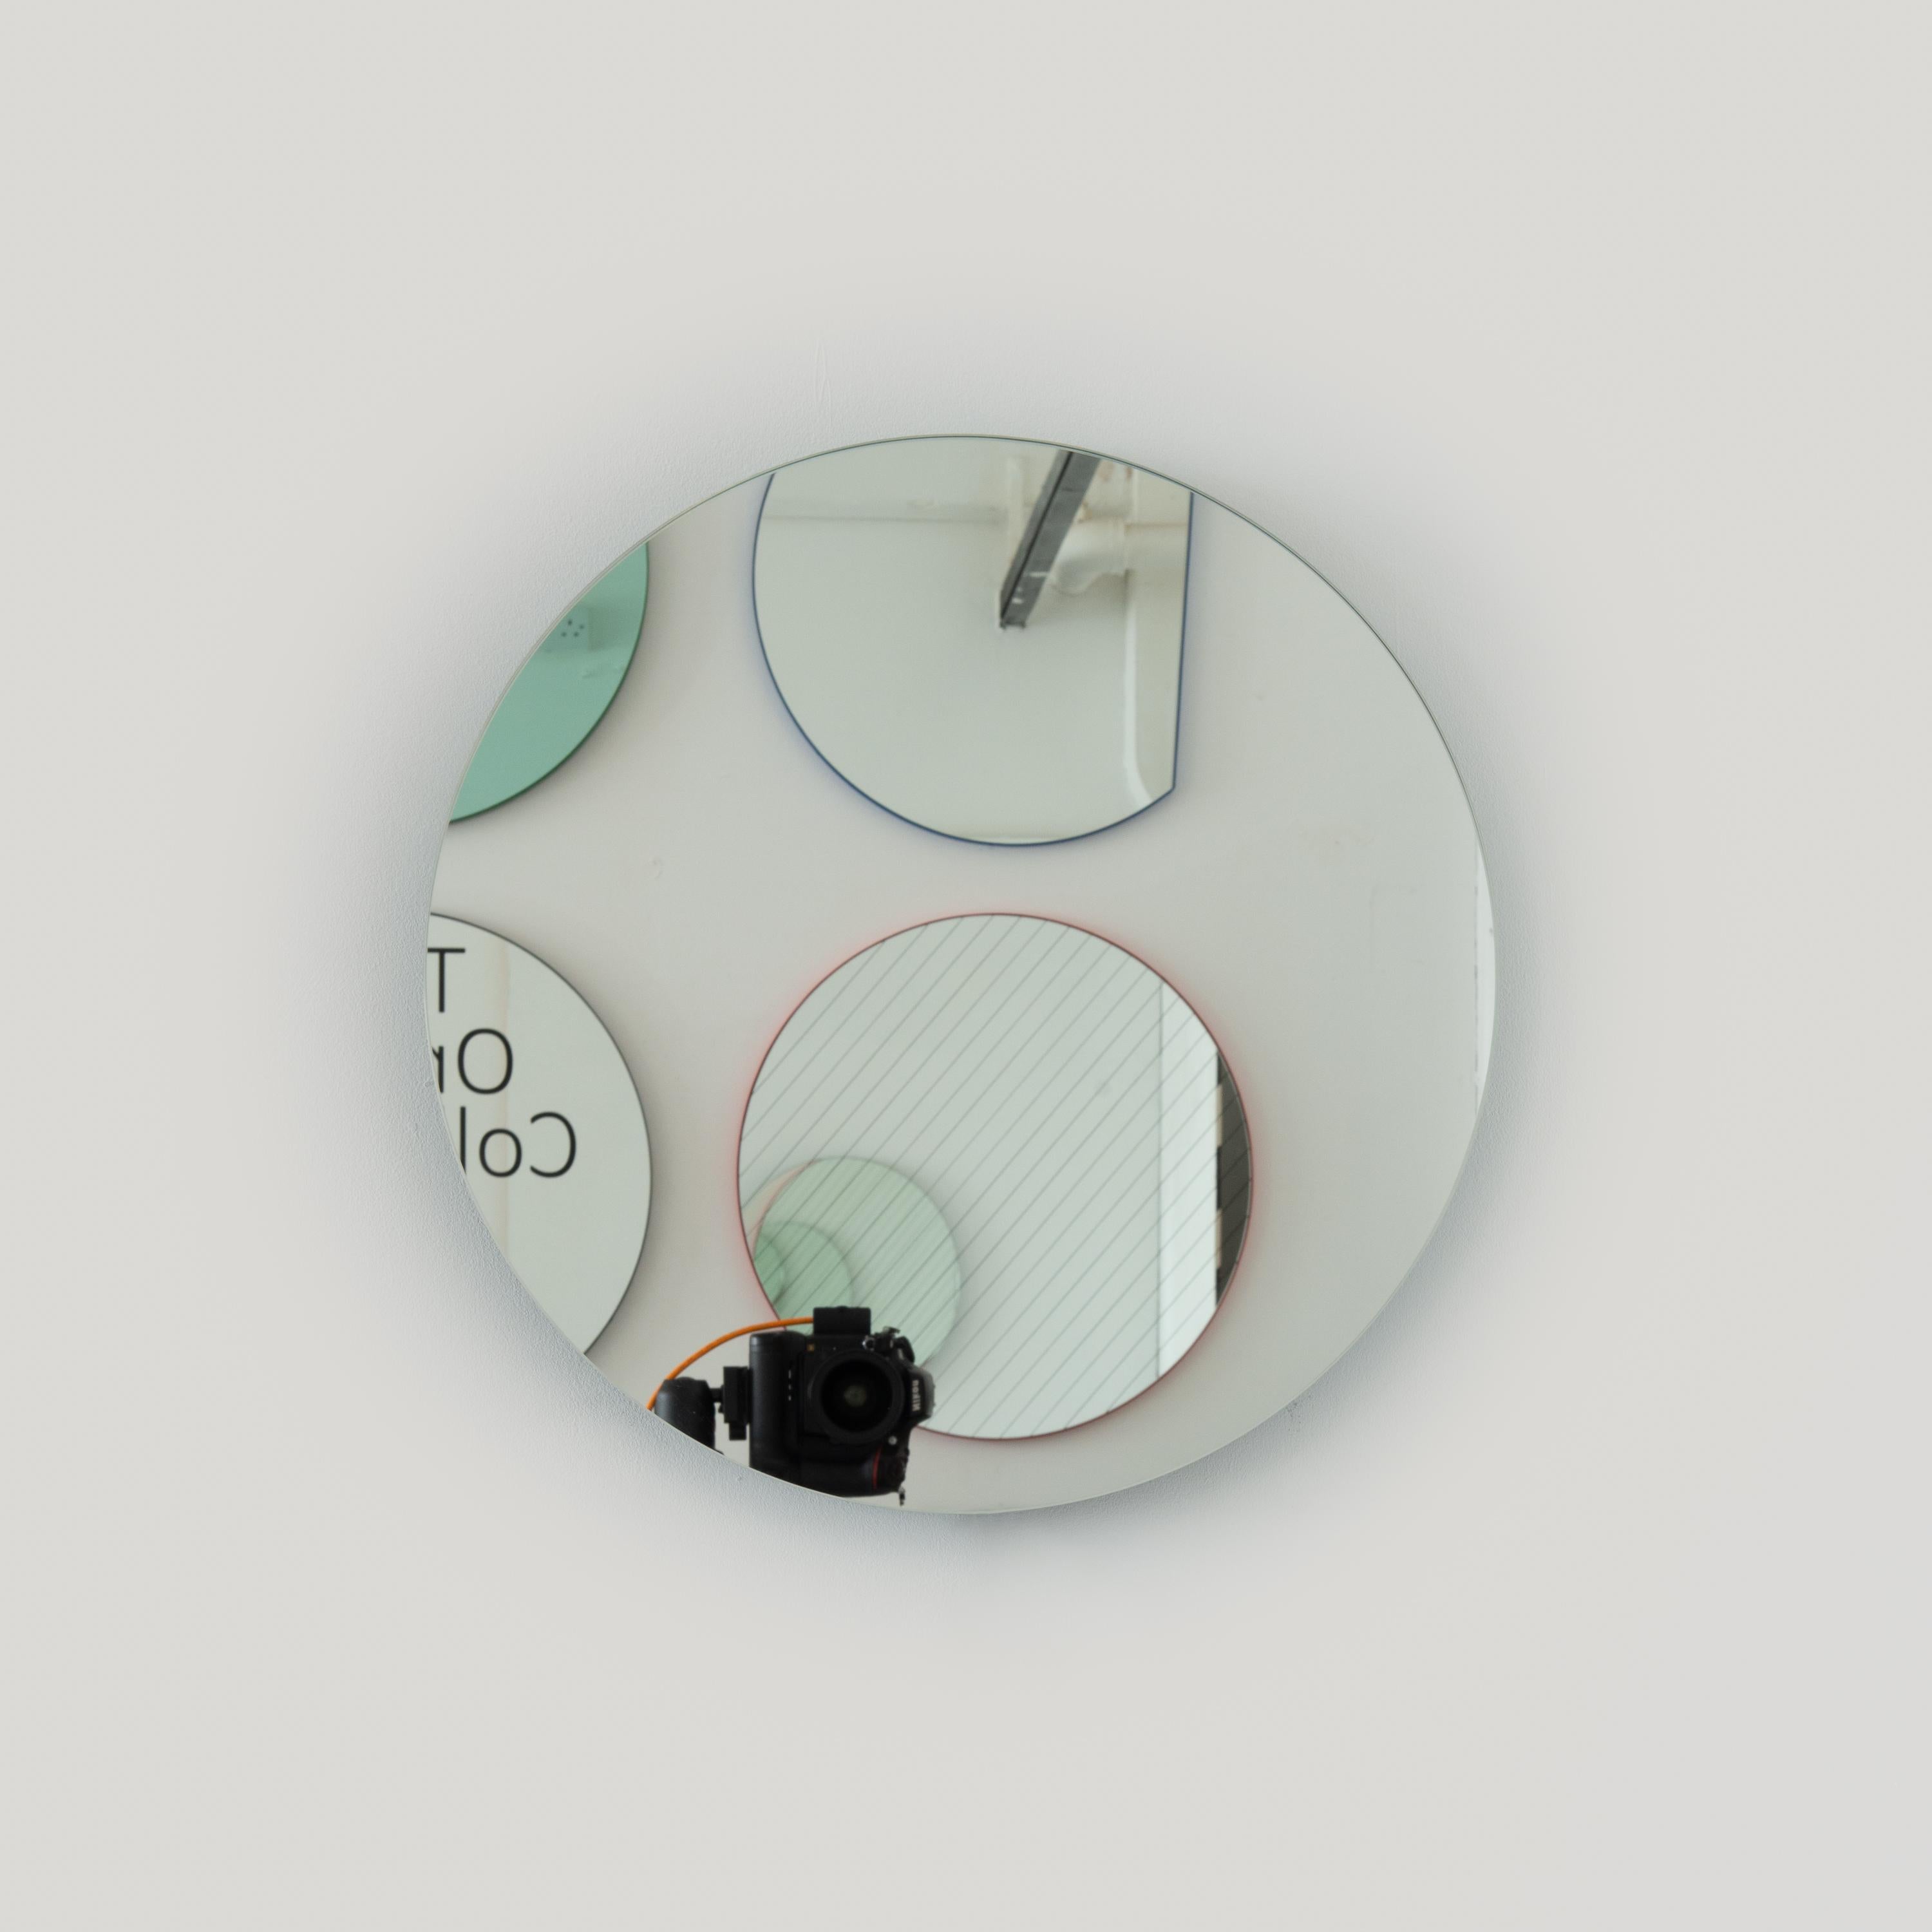 Orbis Back Illuminated Round Contemporary Frameless Mirror, Customisable, Large For Sale 6